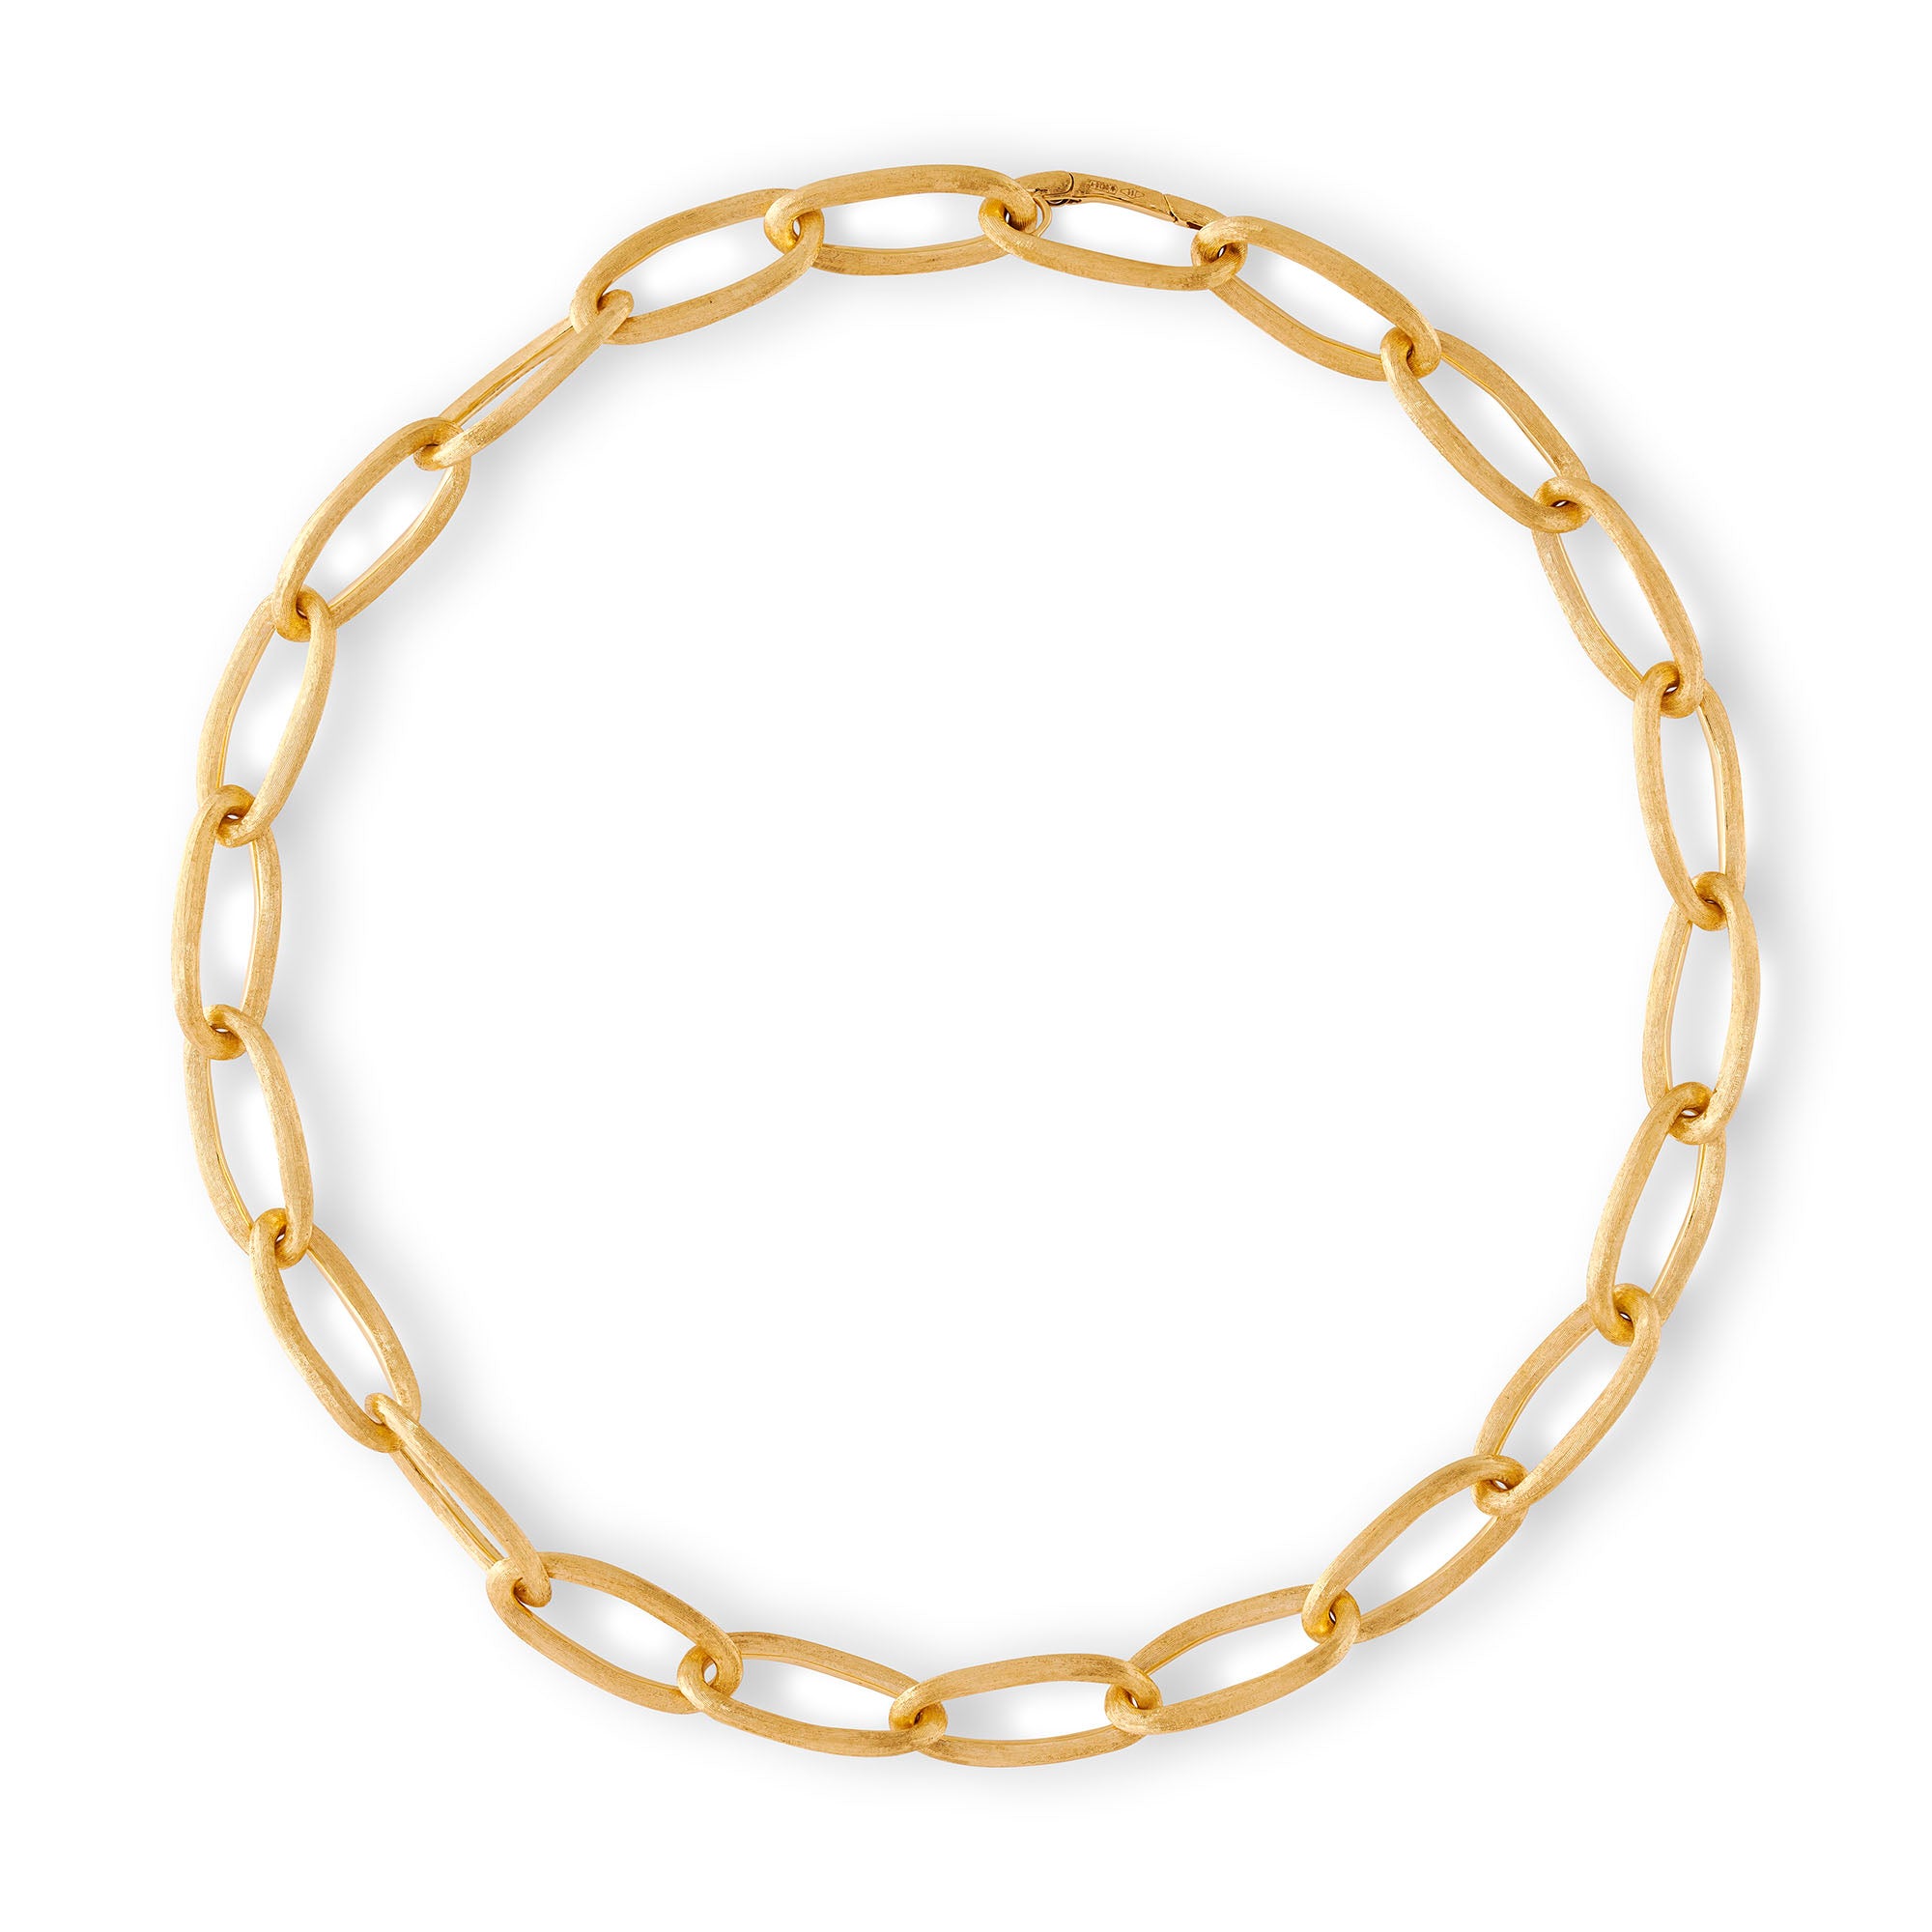 Jaipur 18ct yellow gold link necklace by Marco Bicego